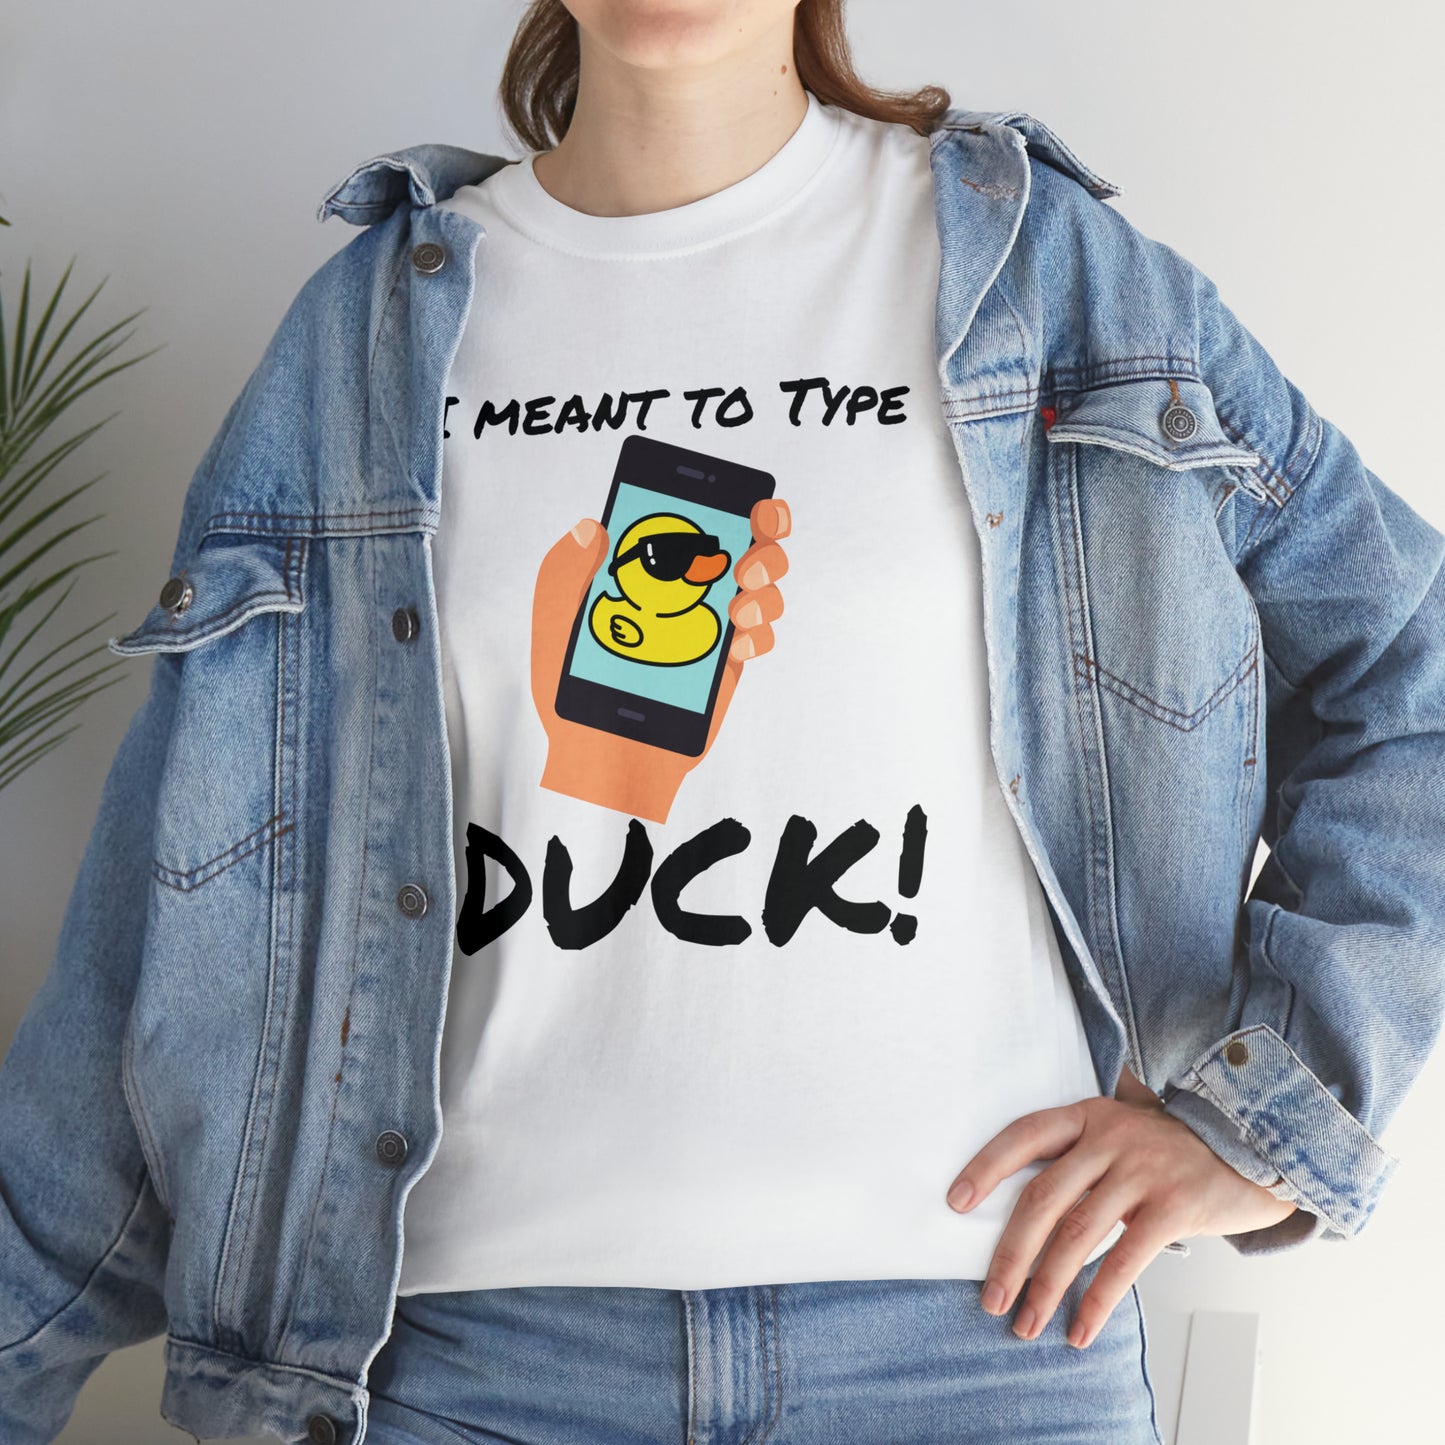 "I Meant to Type Duck!" Unisex T-Shirt